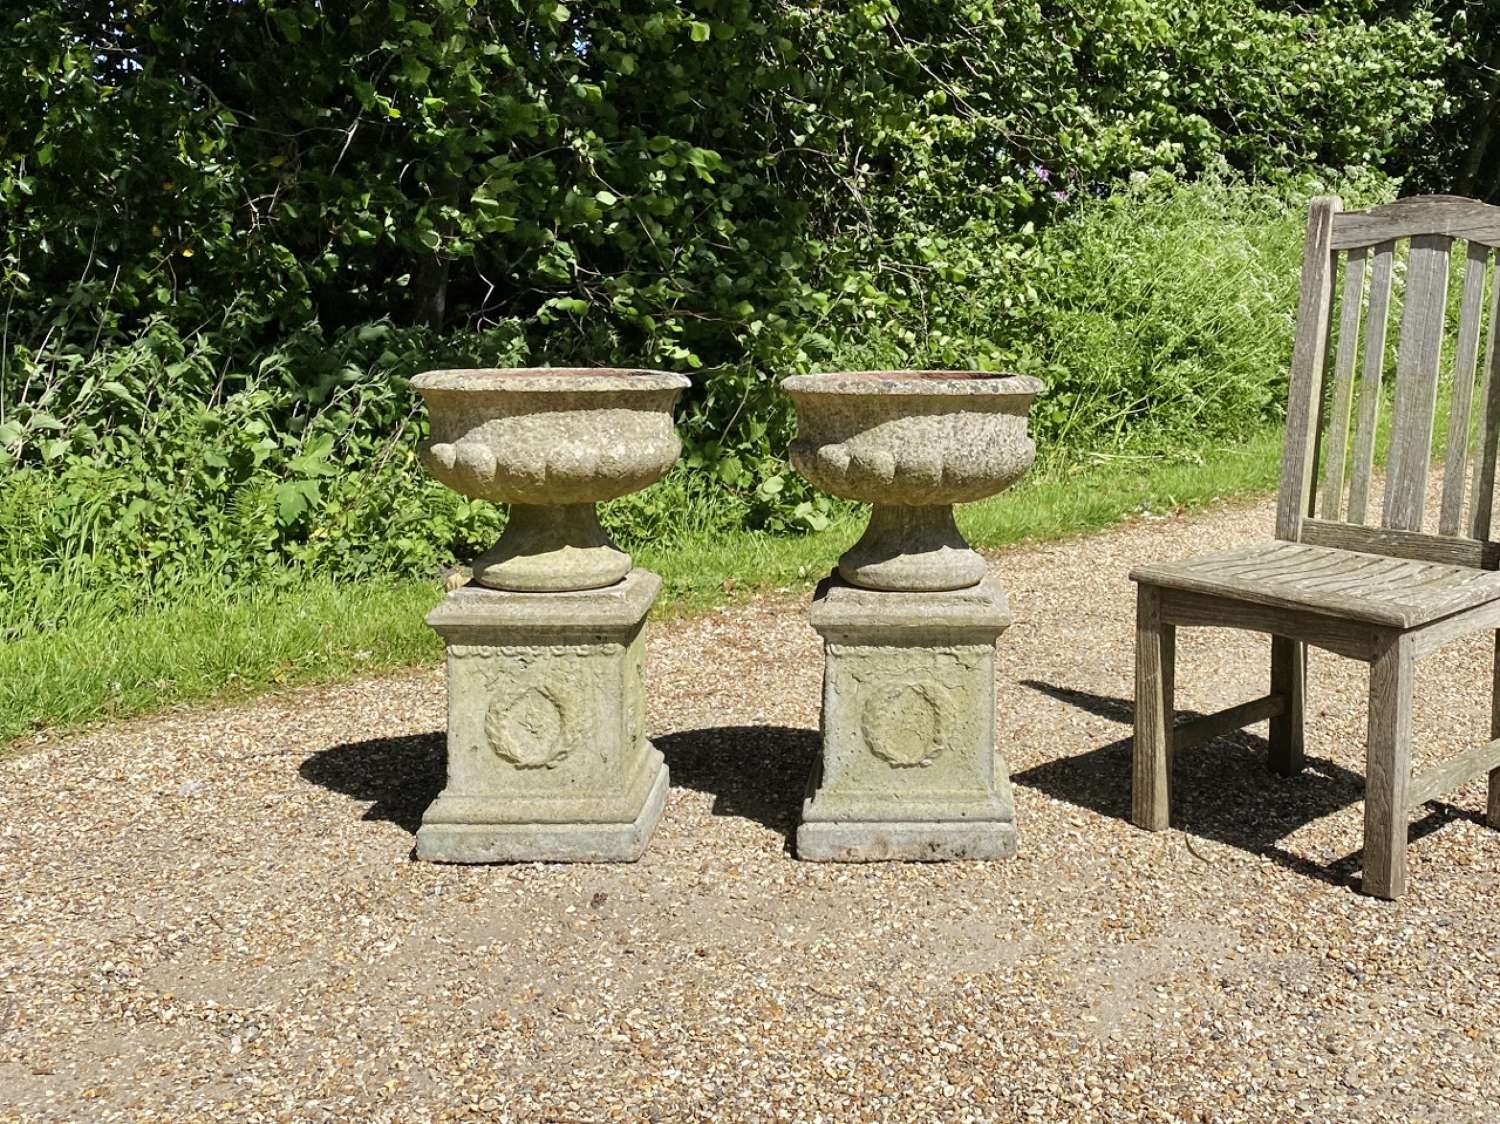 Pair of Small Patinated Urns with Pedestals